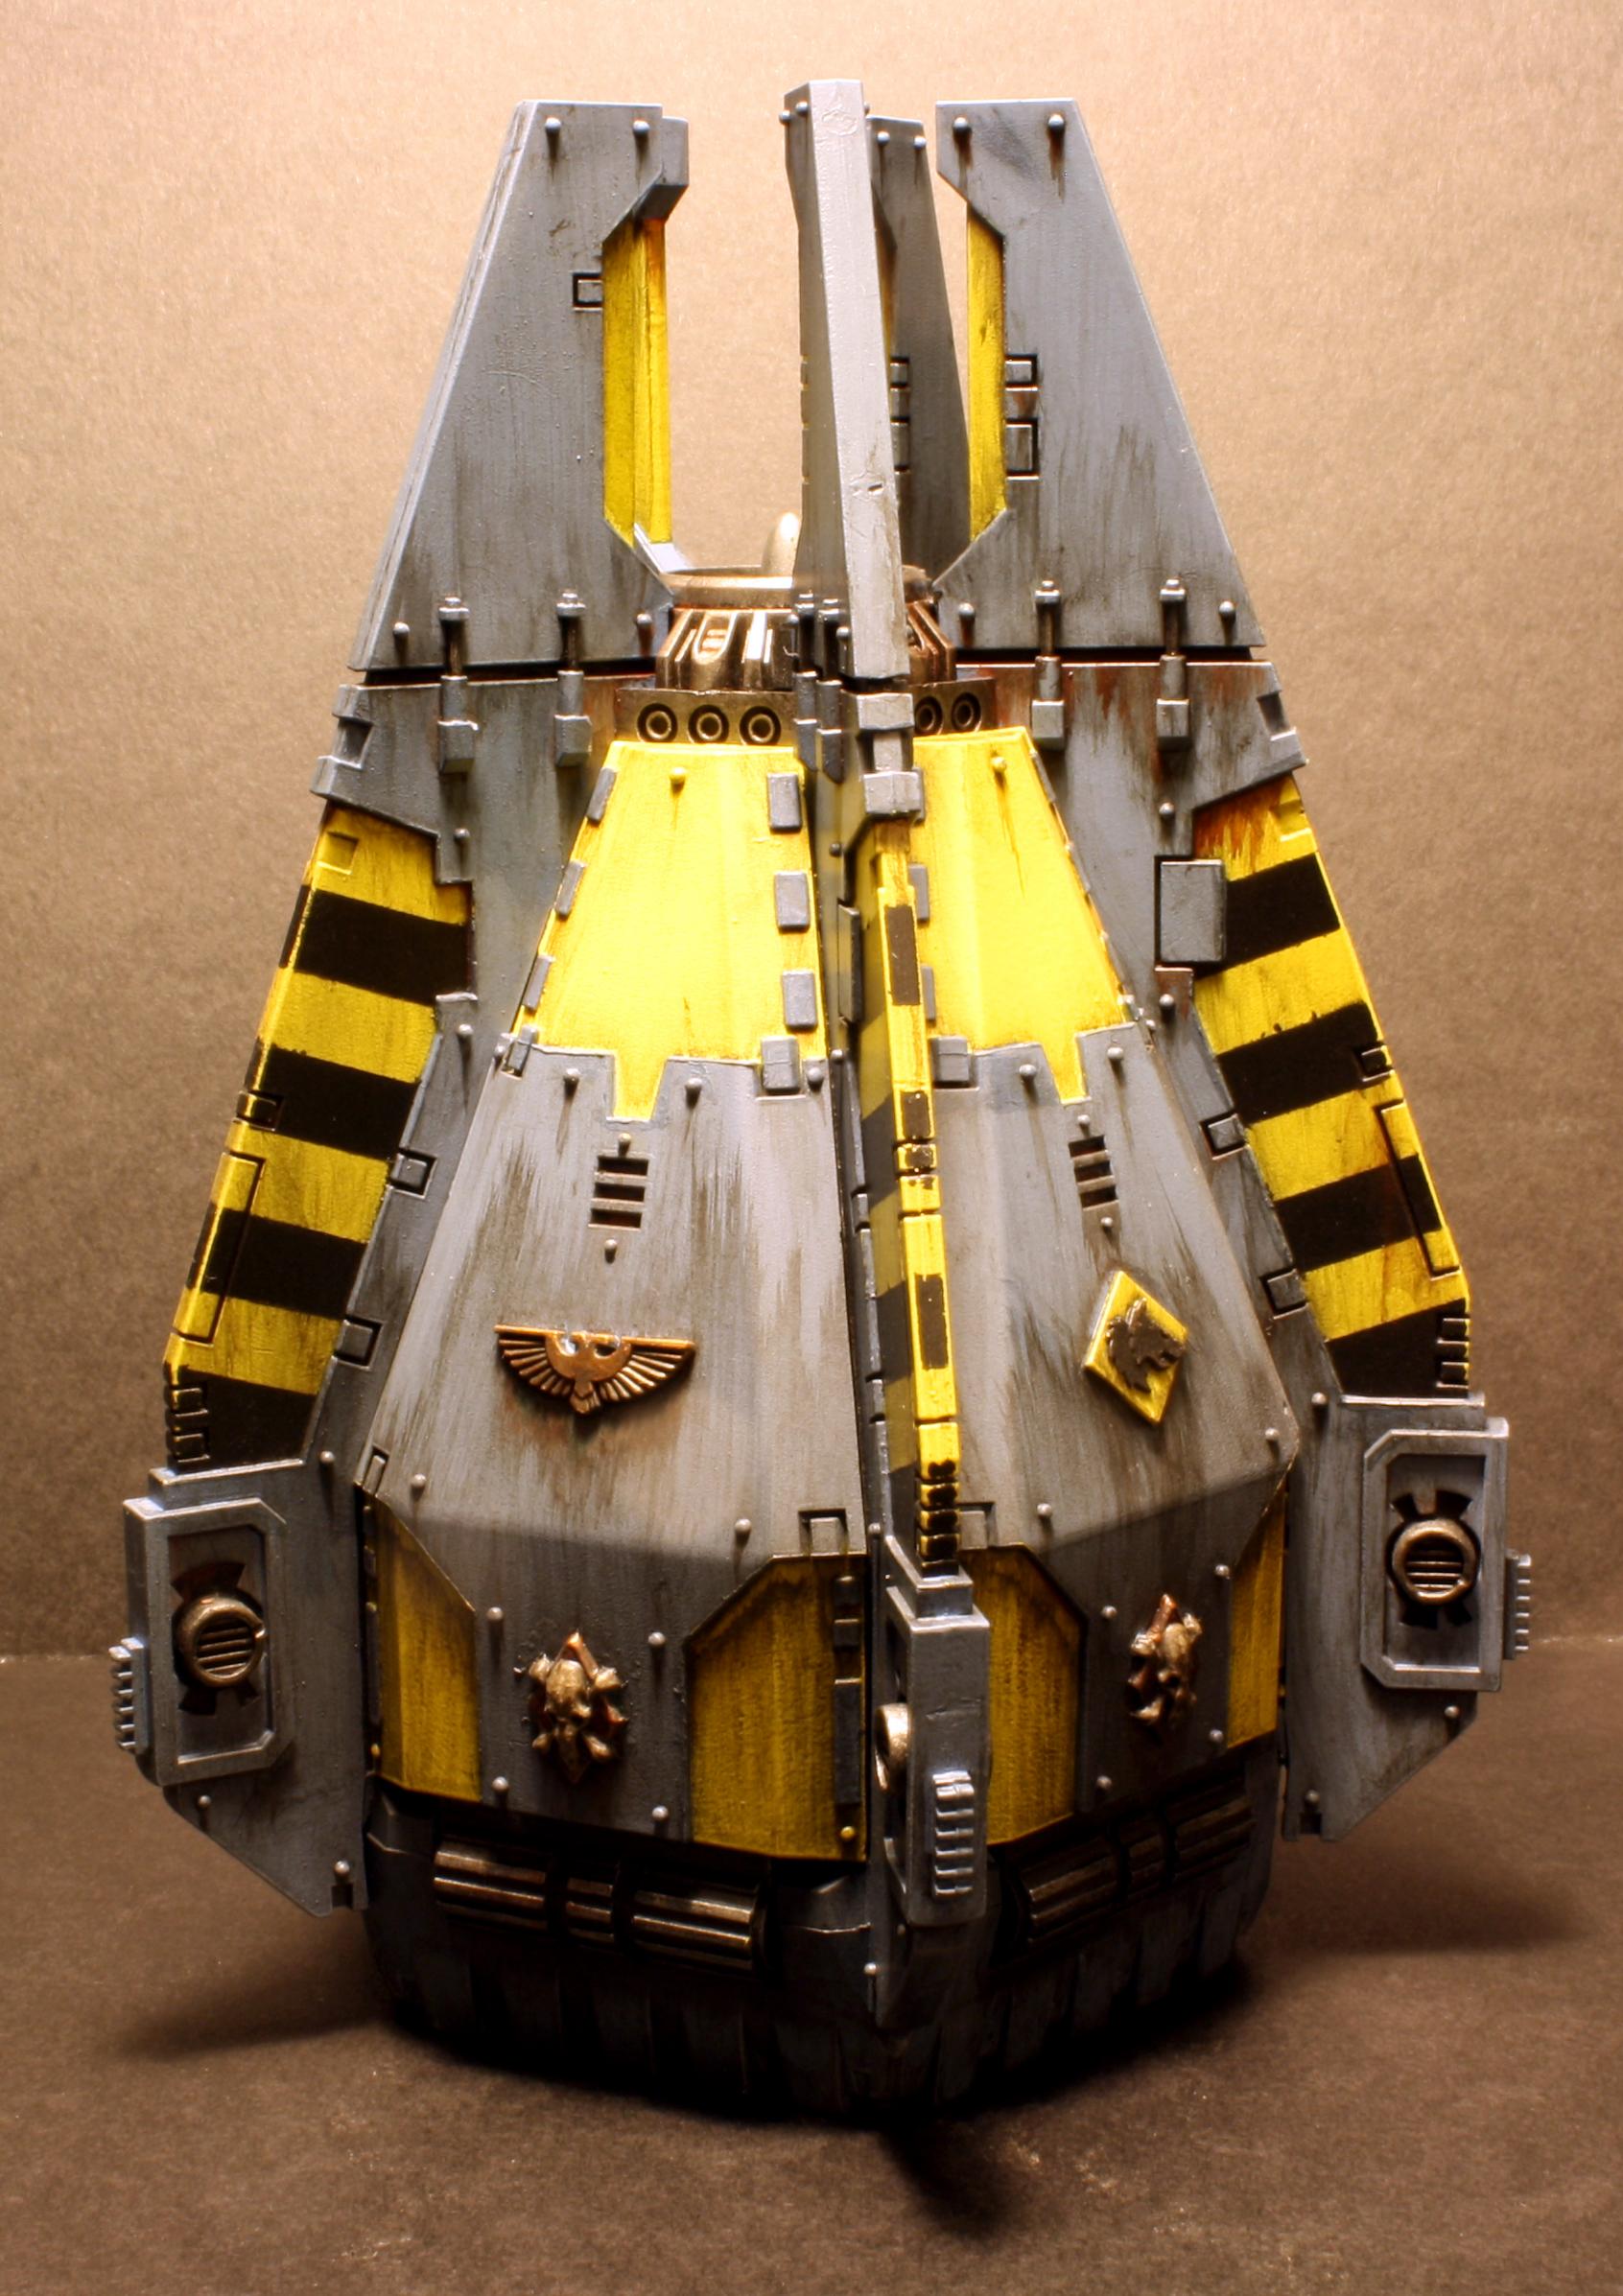 Drop Pod, Space Marines, Space Wolves